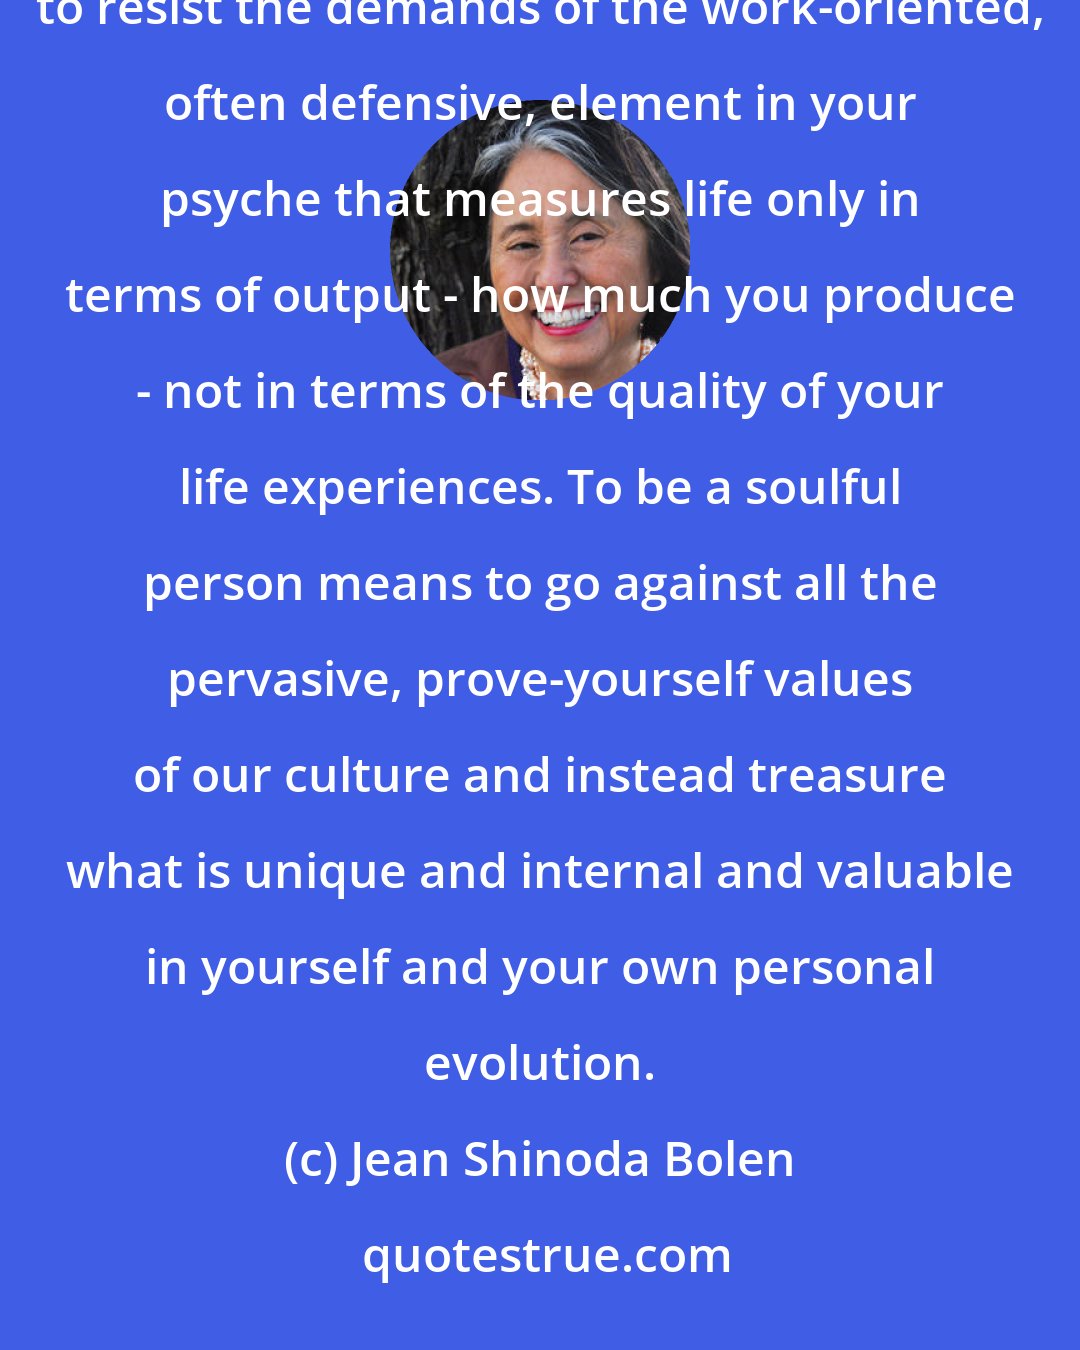 Jean Shinoda Bolen: You have the need and the right to spend part of your life caring for your soul. It is not easy. You have to resist the demands of the work-oriented, often defensive, element in your psyche that measures life only in terms of output - how much you produce - not in terms of the quality of your life experiences. To be a soulful person means to go against all the pervasive, prove-yourself values of our culture and instead treasure what is unique and internal and valuable in yourself and your own personal evolution.